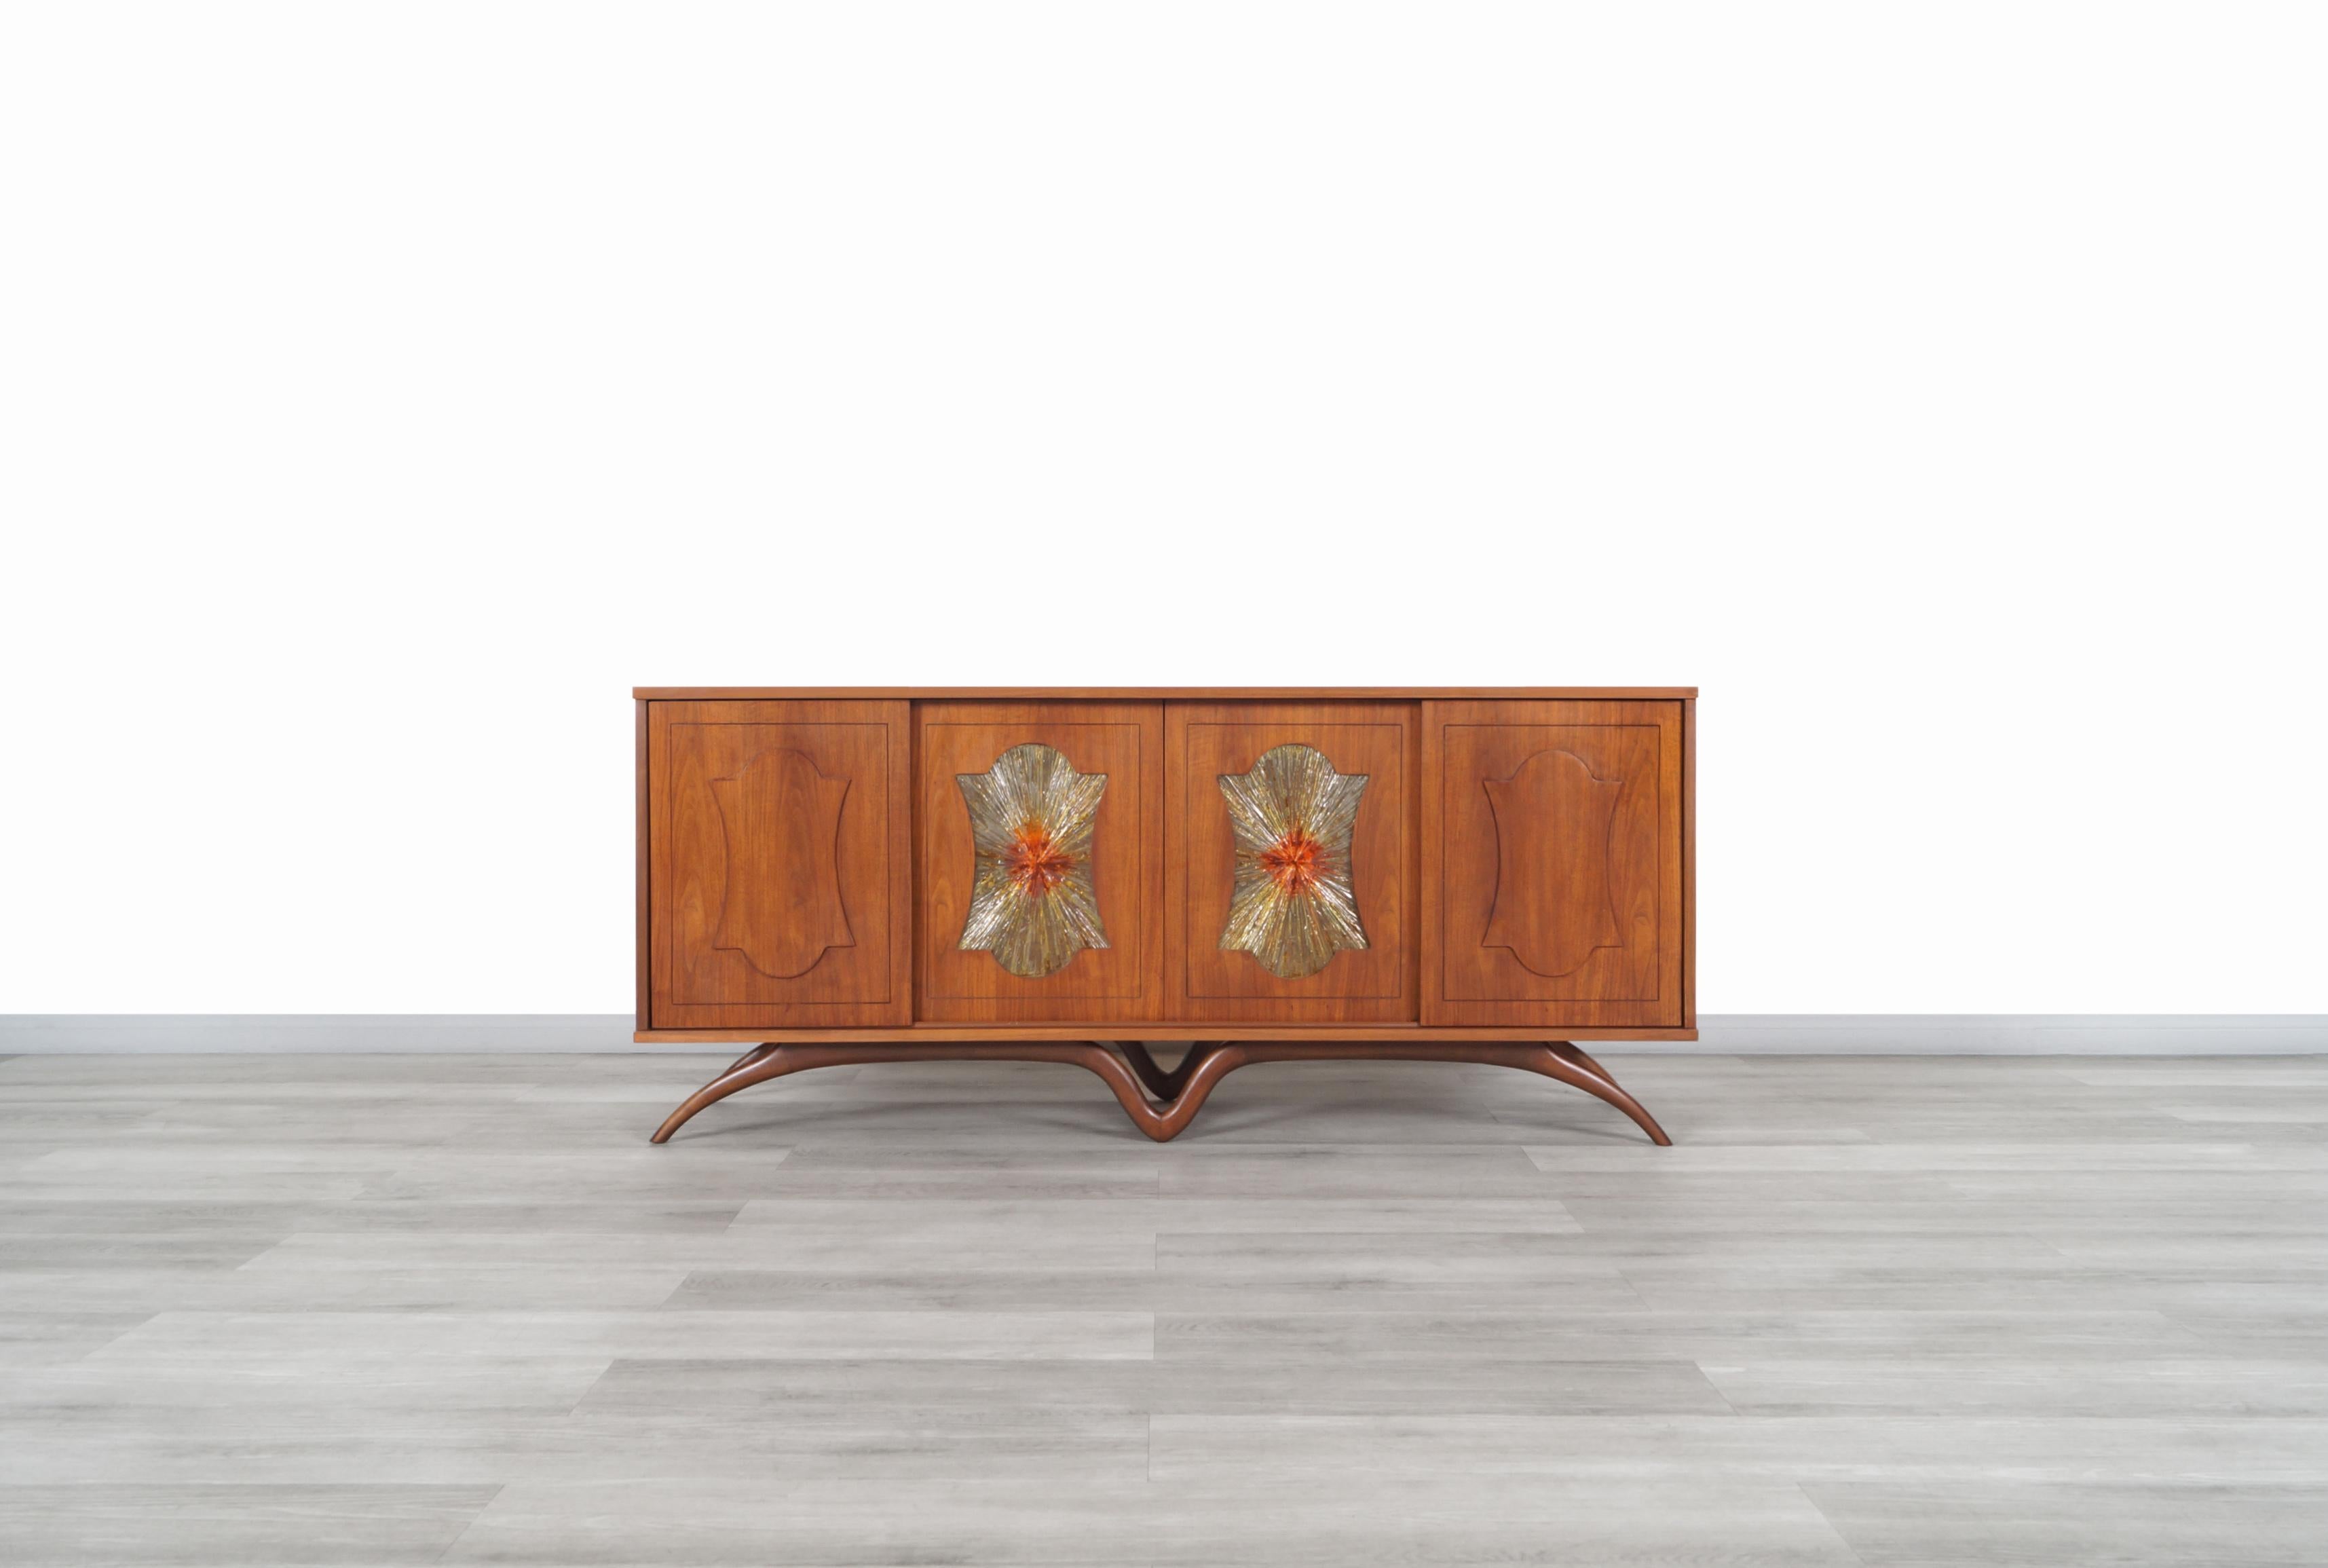 Wonderful mid century sculptural walnut credenza manufactured and designed in the United States, circa 1950s. This credenza has an elegant design where the details in its construction make it different from any other piece of furniture. It has been